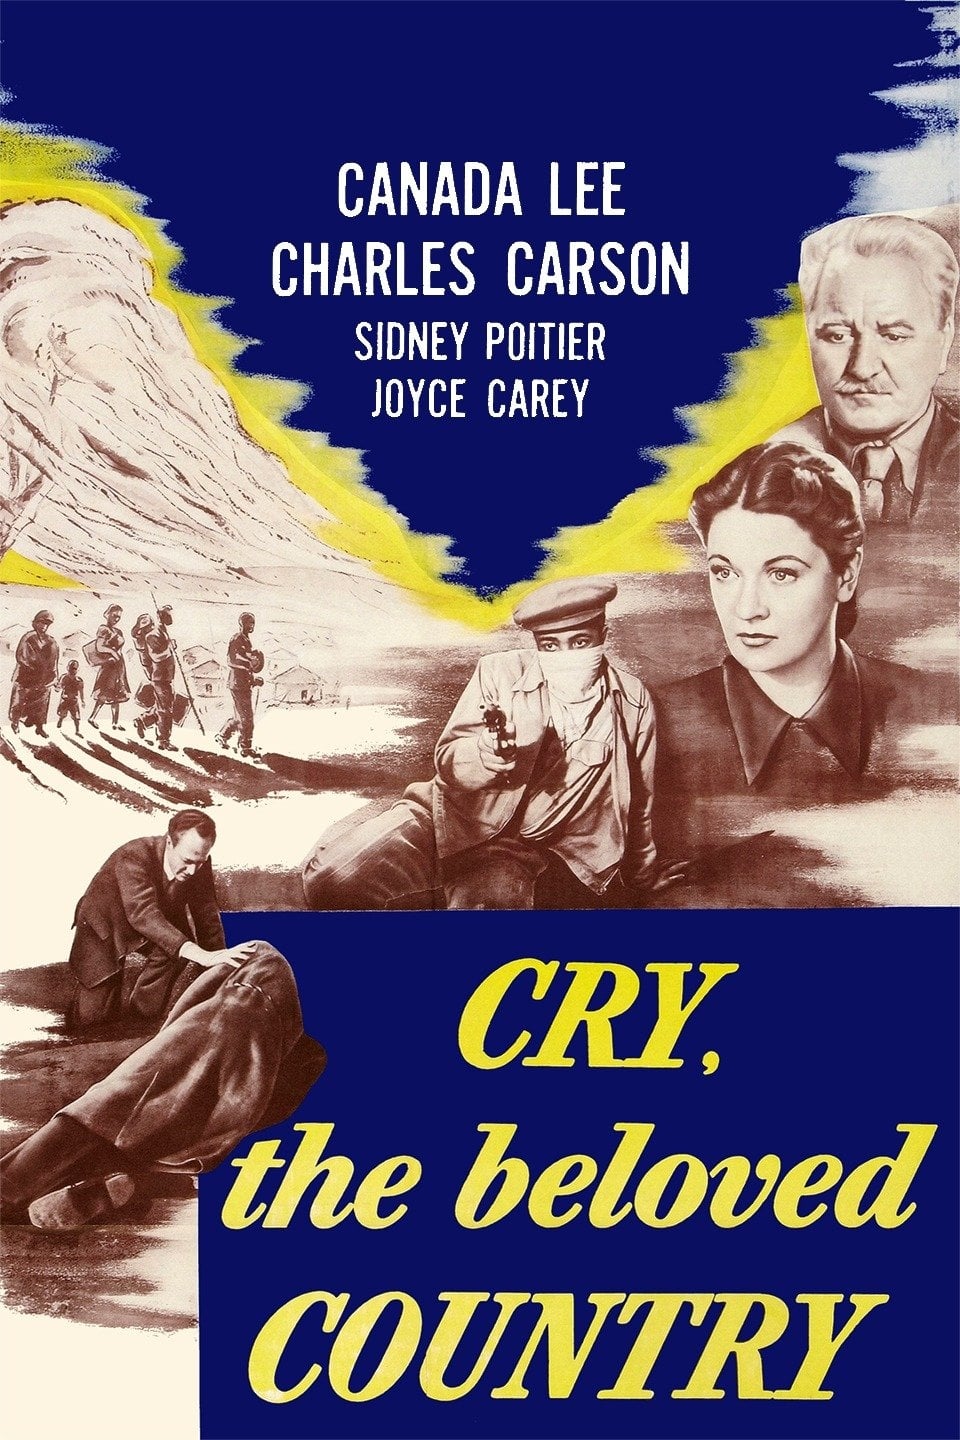 Caratula de Cry, the Beloved Country (Cry, the Beloved Country) 